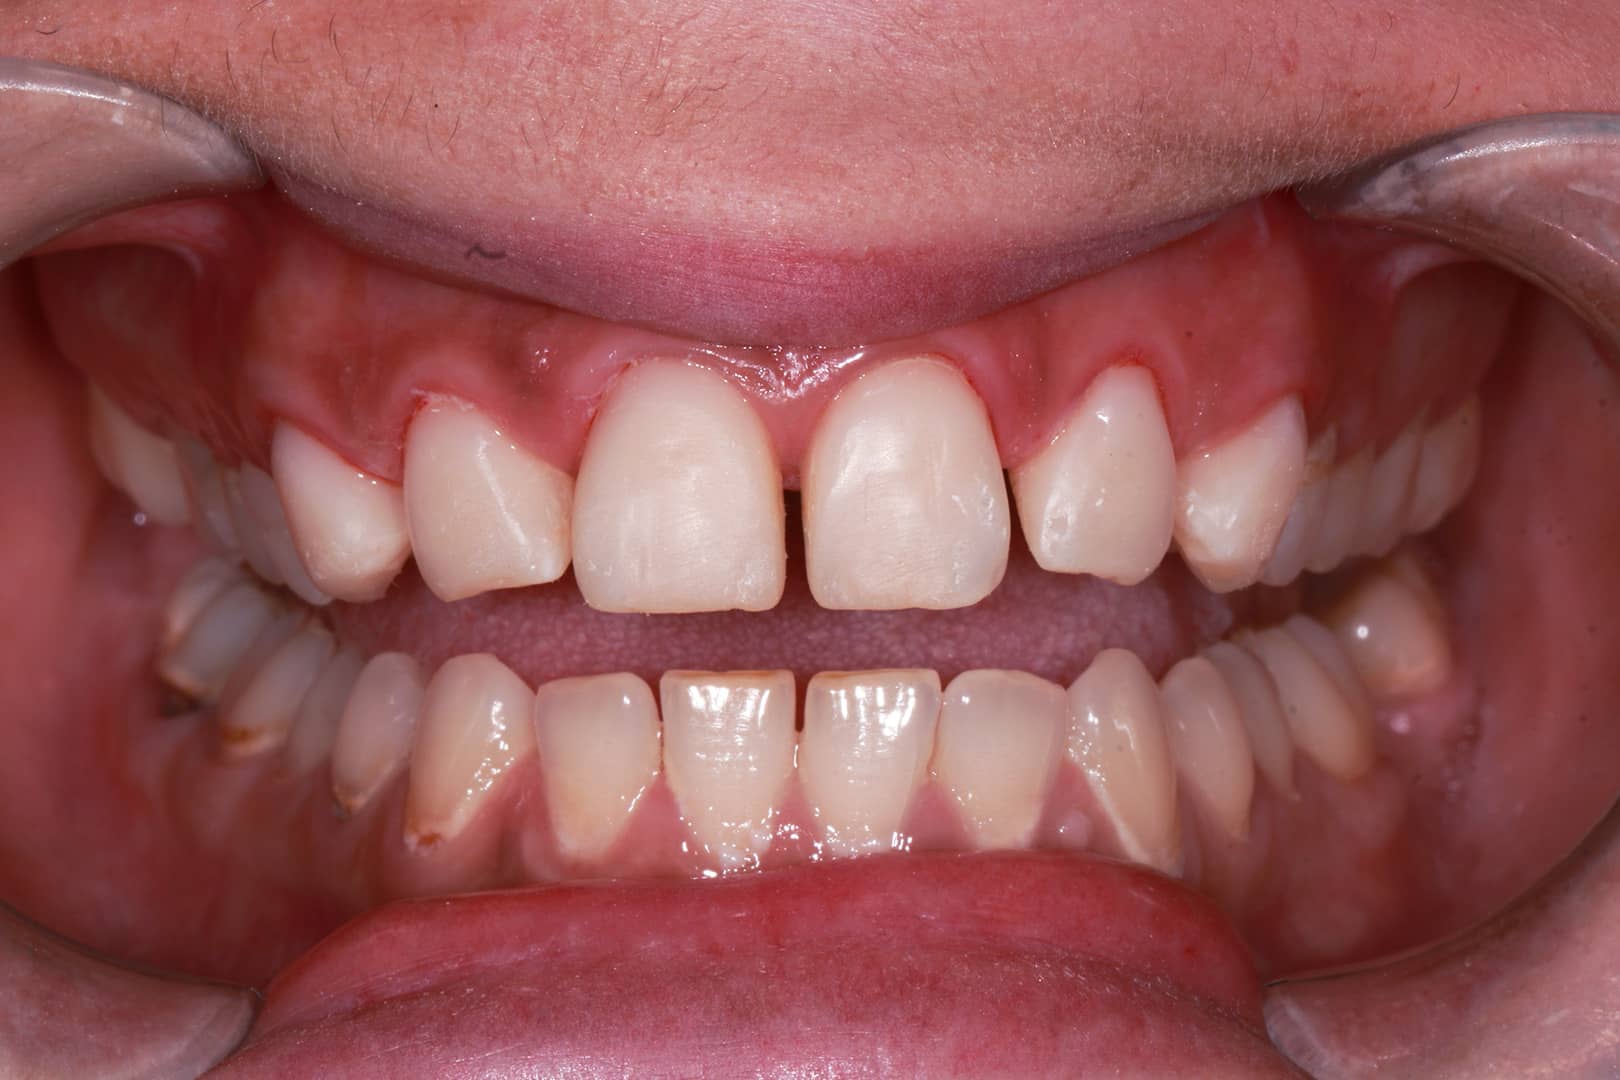 Gallery of Patient Dental Bonding Treatment Humm Payment Results See the Gallery of After Photos